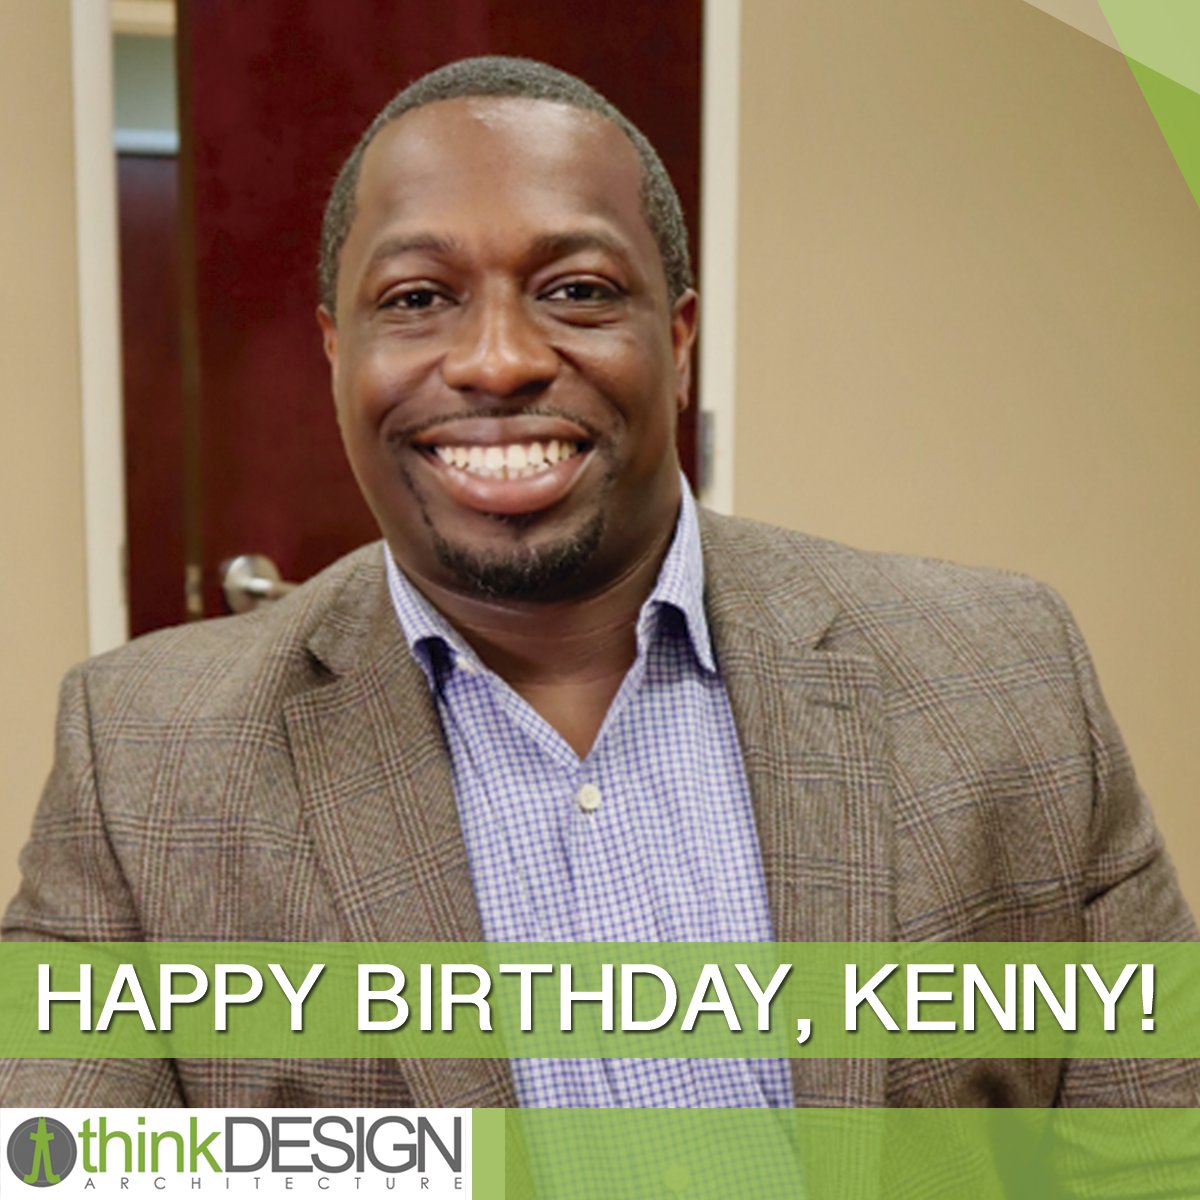 Happy Birthday, Kenny!🥳🤩

May the wish you make today come true. The world and fate have so many gifts for you, be brave and strong to get them! 

#ThinkDesignArchitecture #thinkbig #thinkdesign #Architecture #CustomHome #Architect #NYC #NewYorkCity #Design #HomeDesign